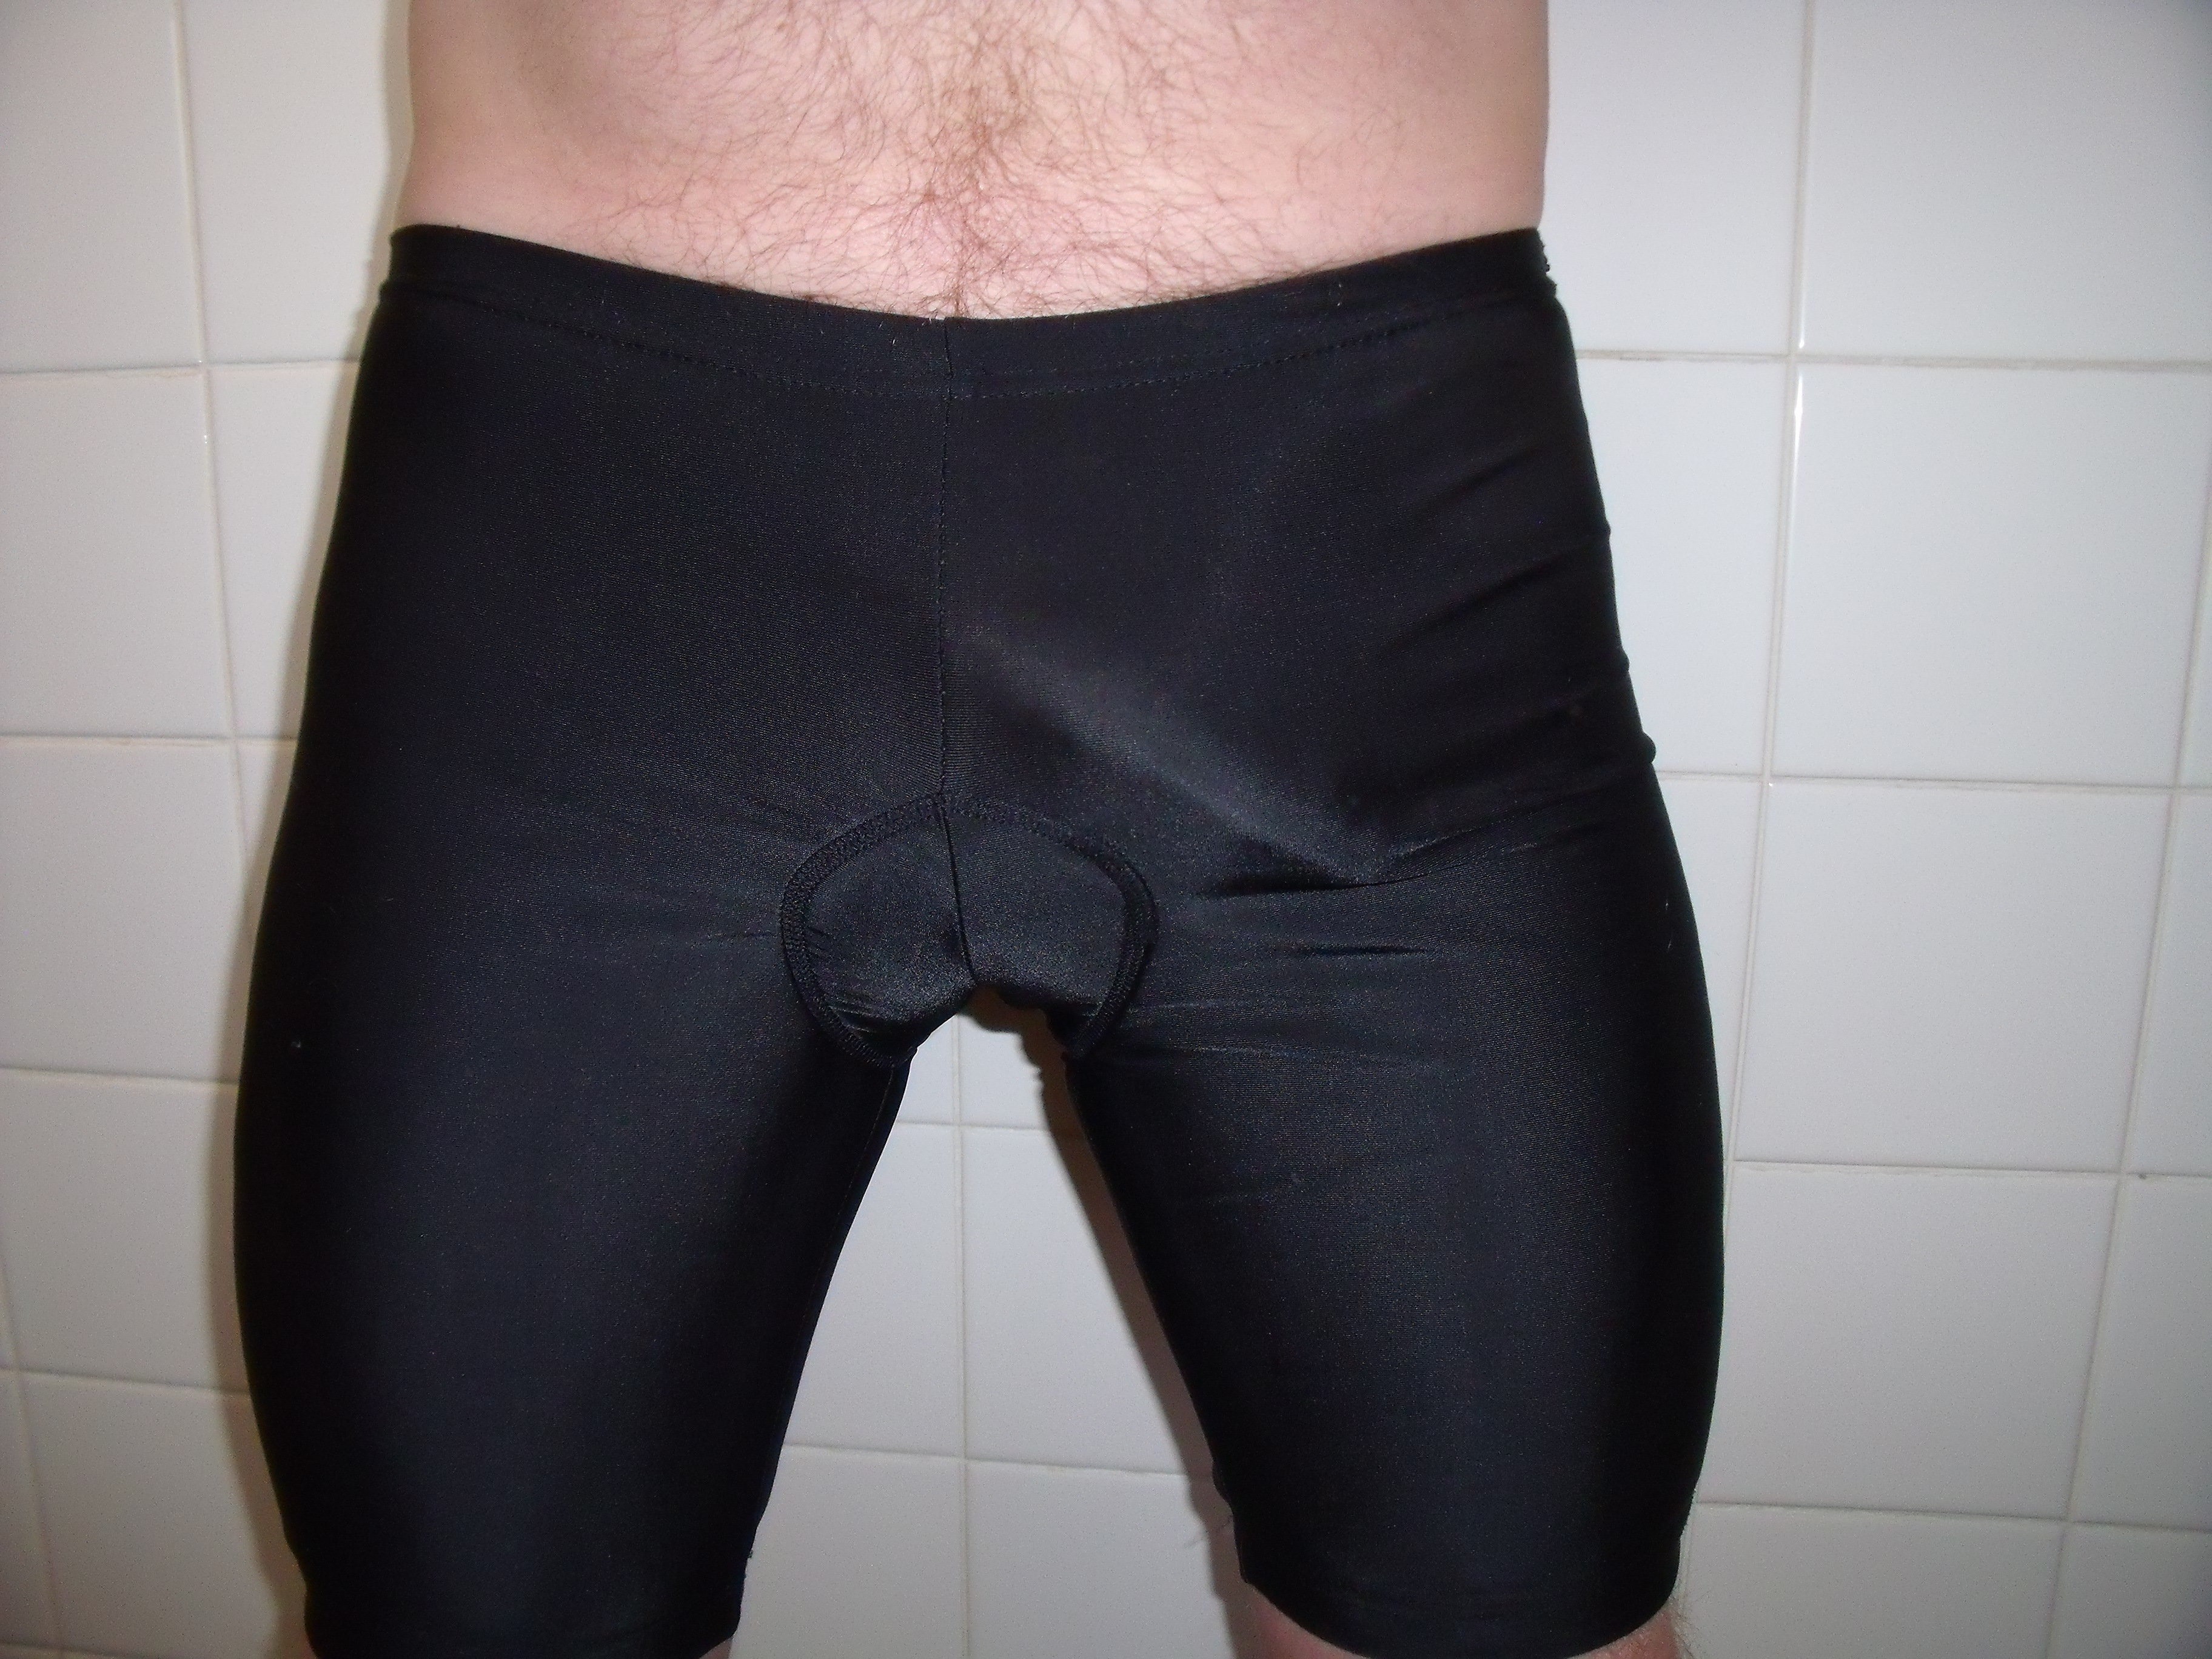 Cycling shorts leads to fetish